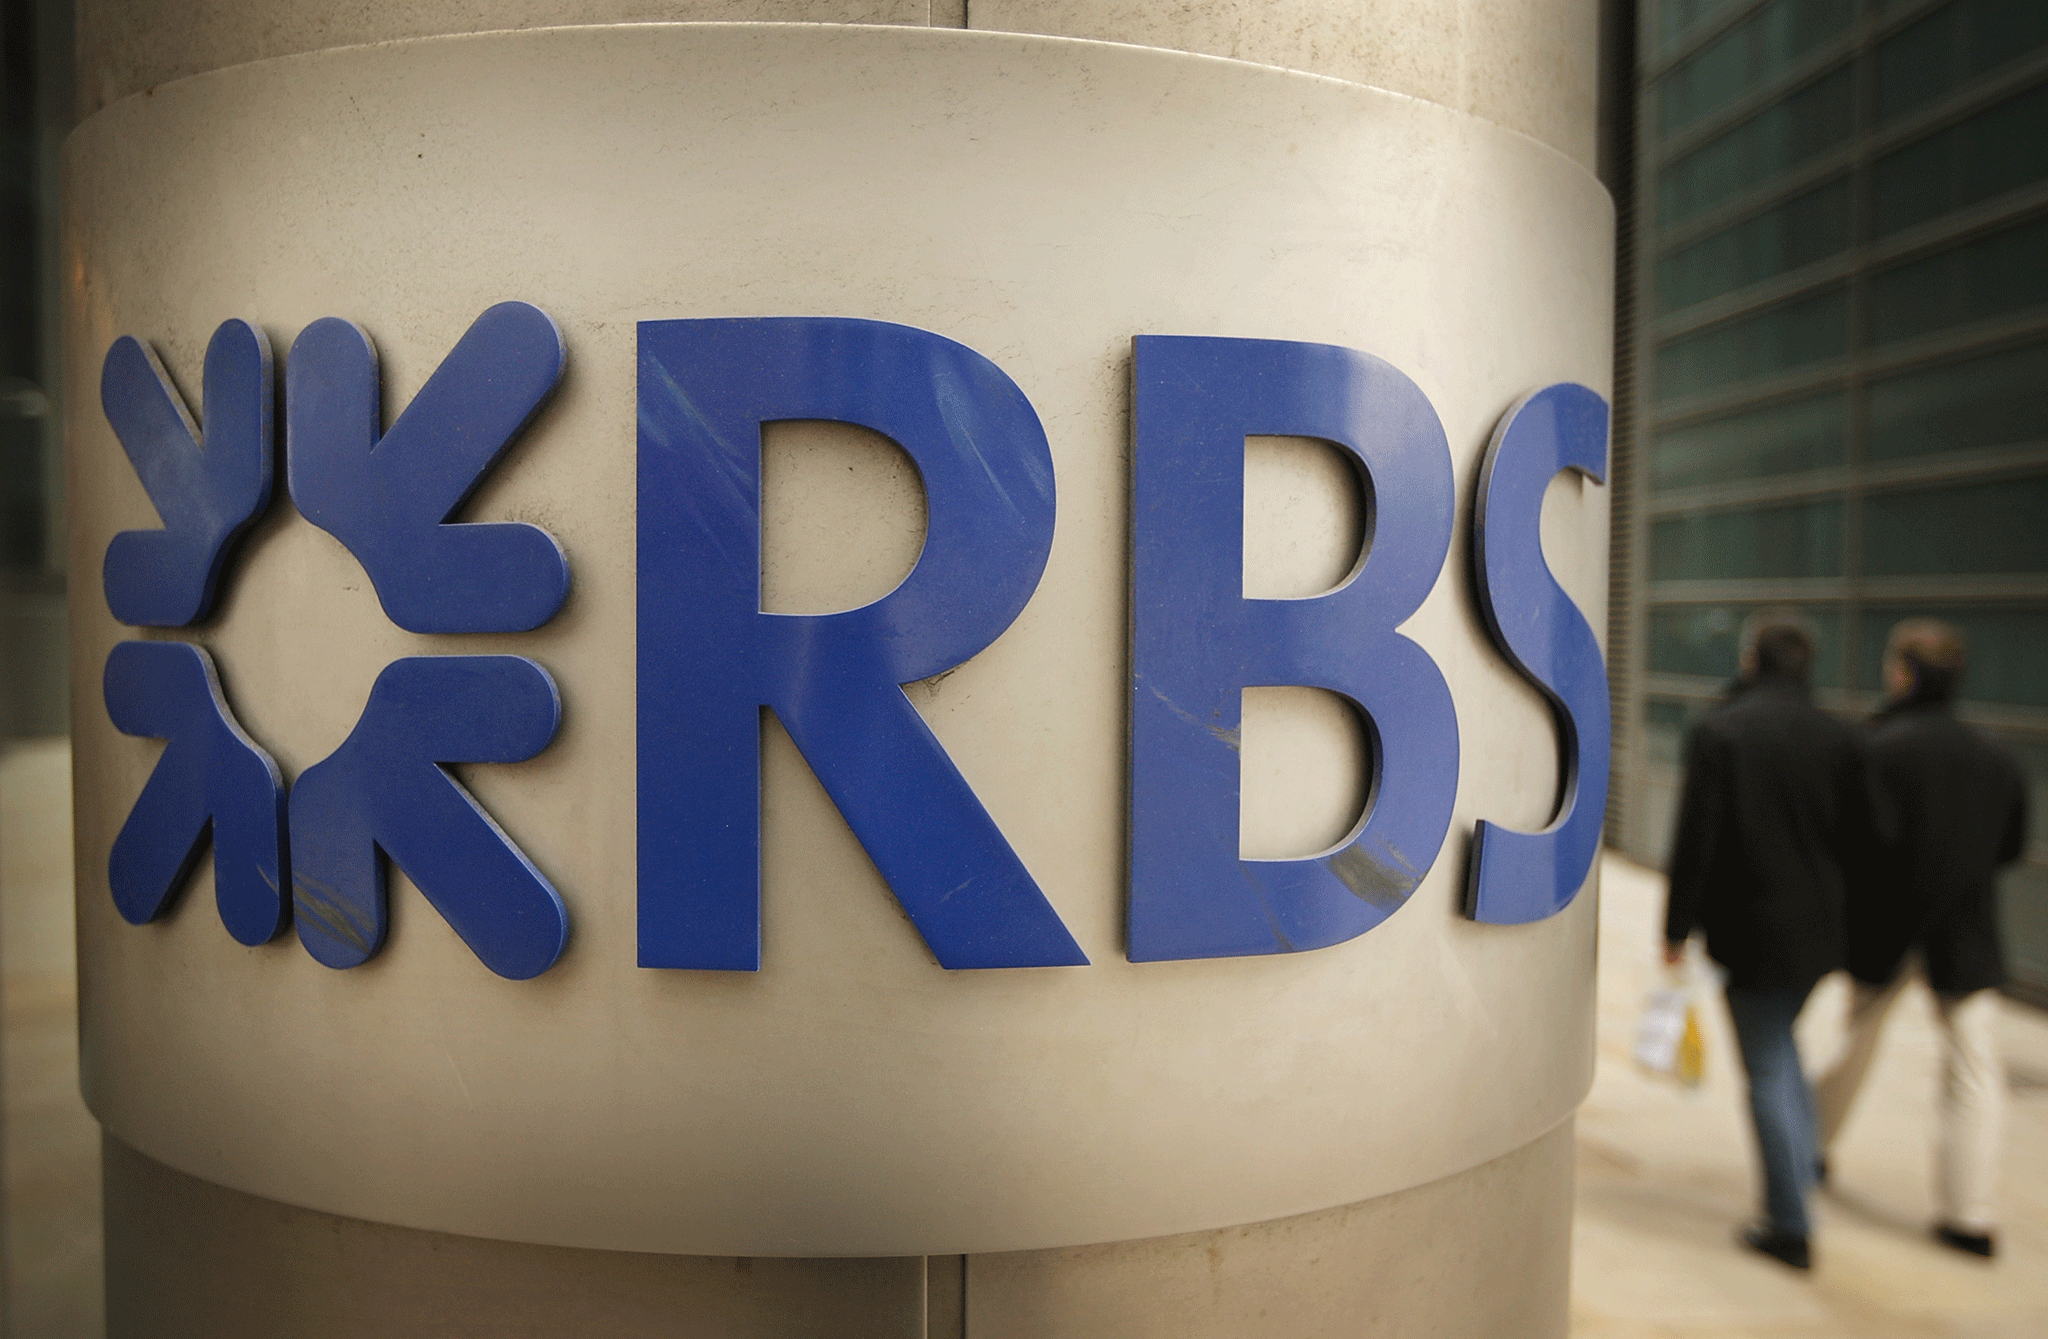 The overhaul of RBS’ image under its new chief executive, Alison Rose, also includes measures to help tackle climate change